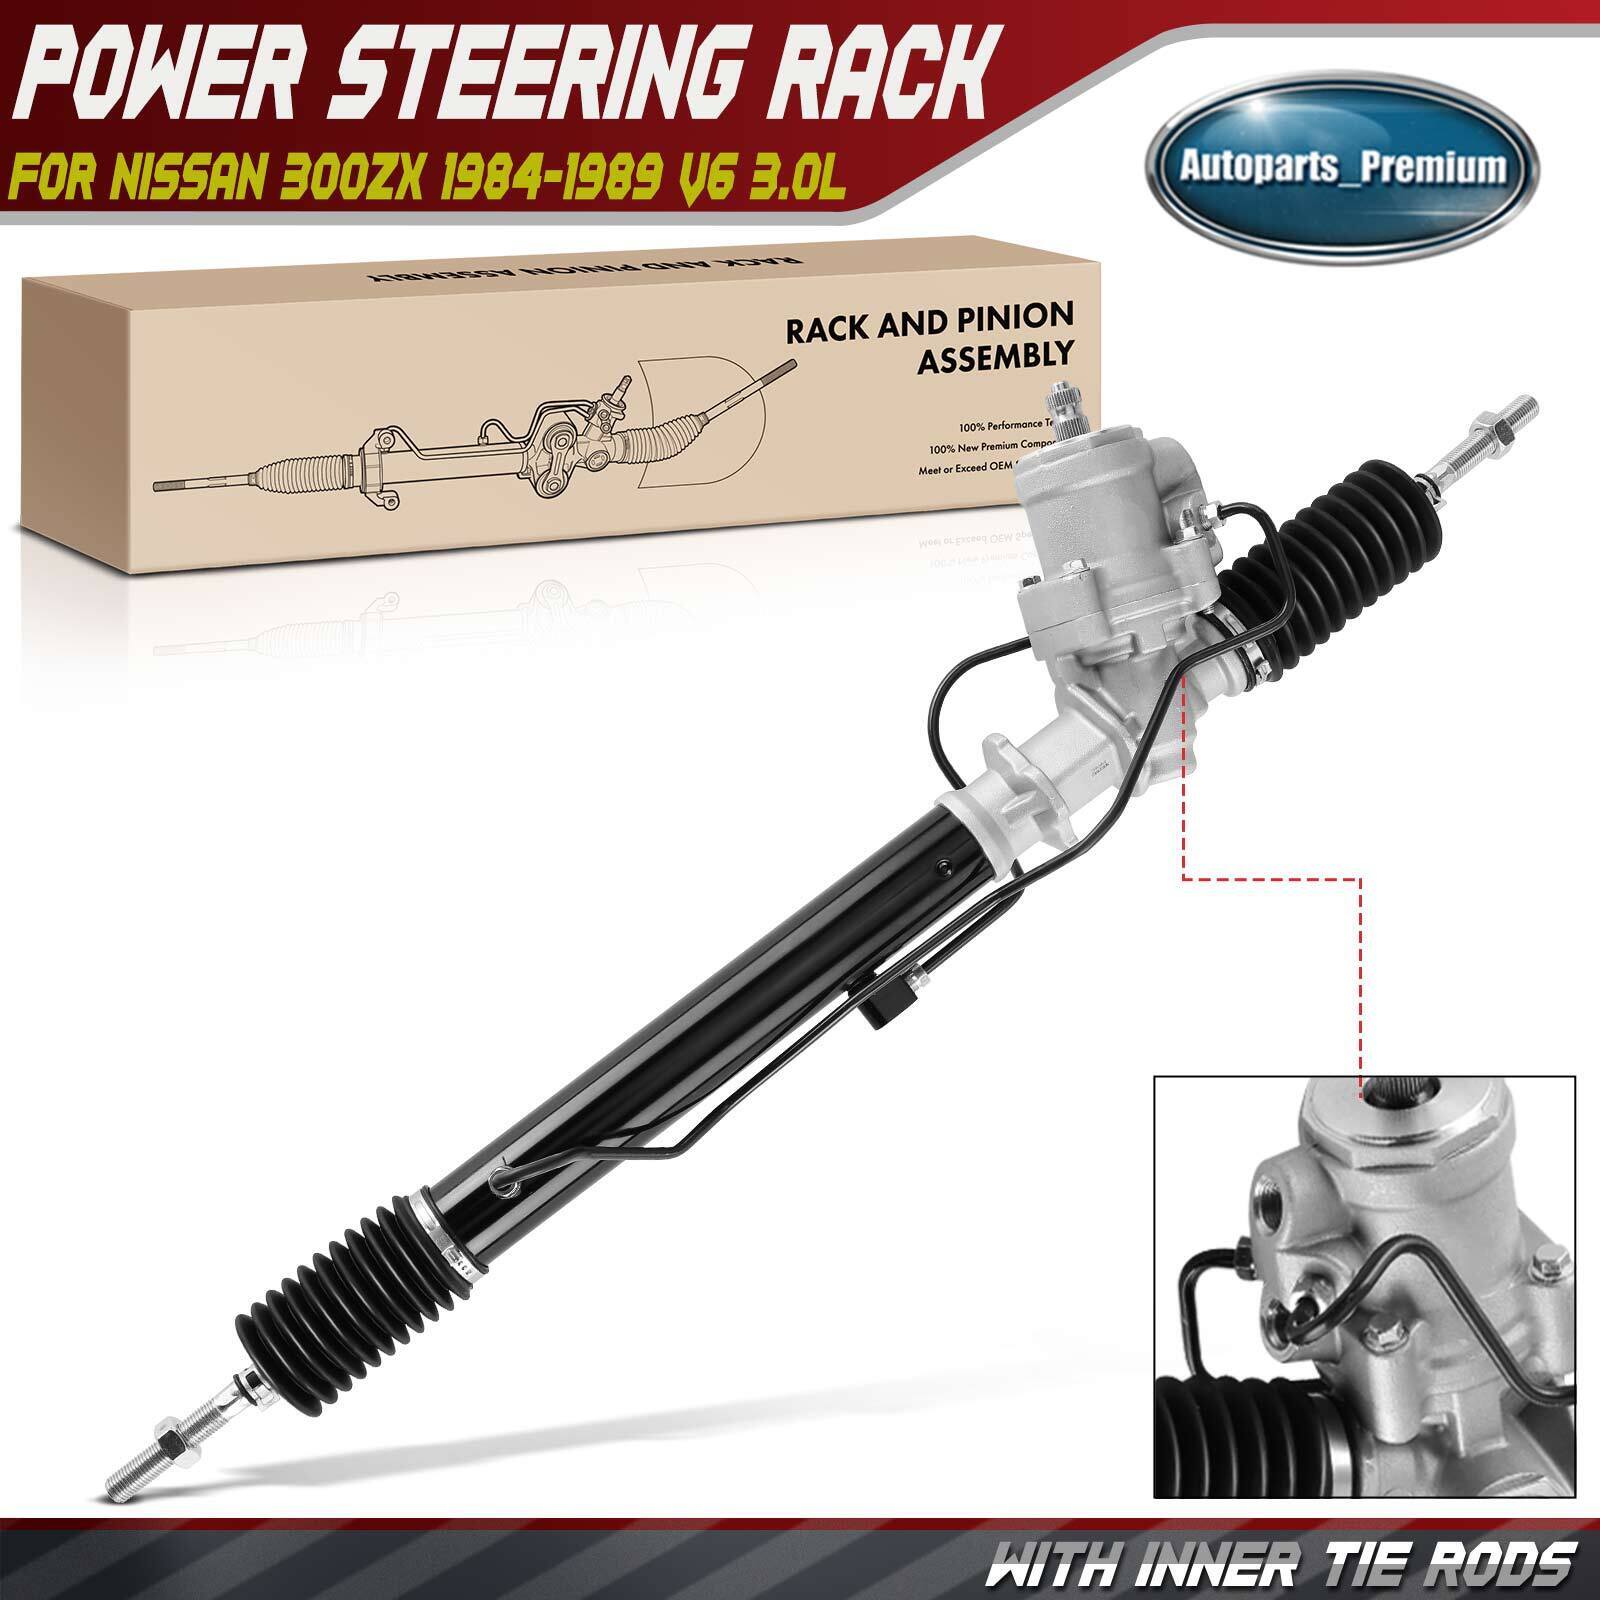 1x Power Steering Rack and Pinion Assembly for Nissan 300ZX 1984-1989 4900121P00